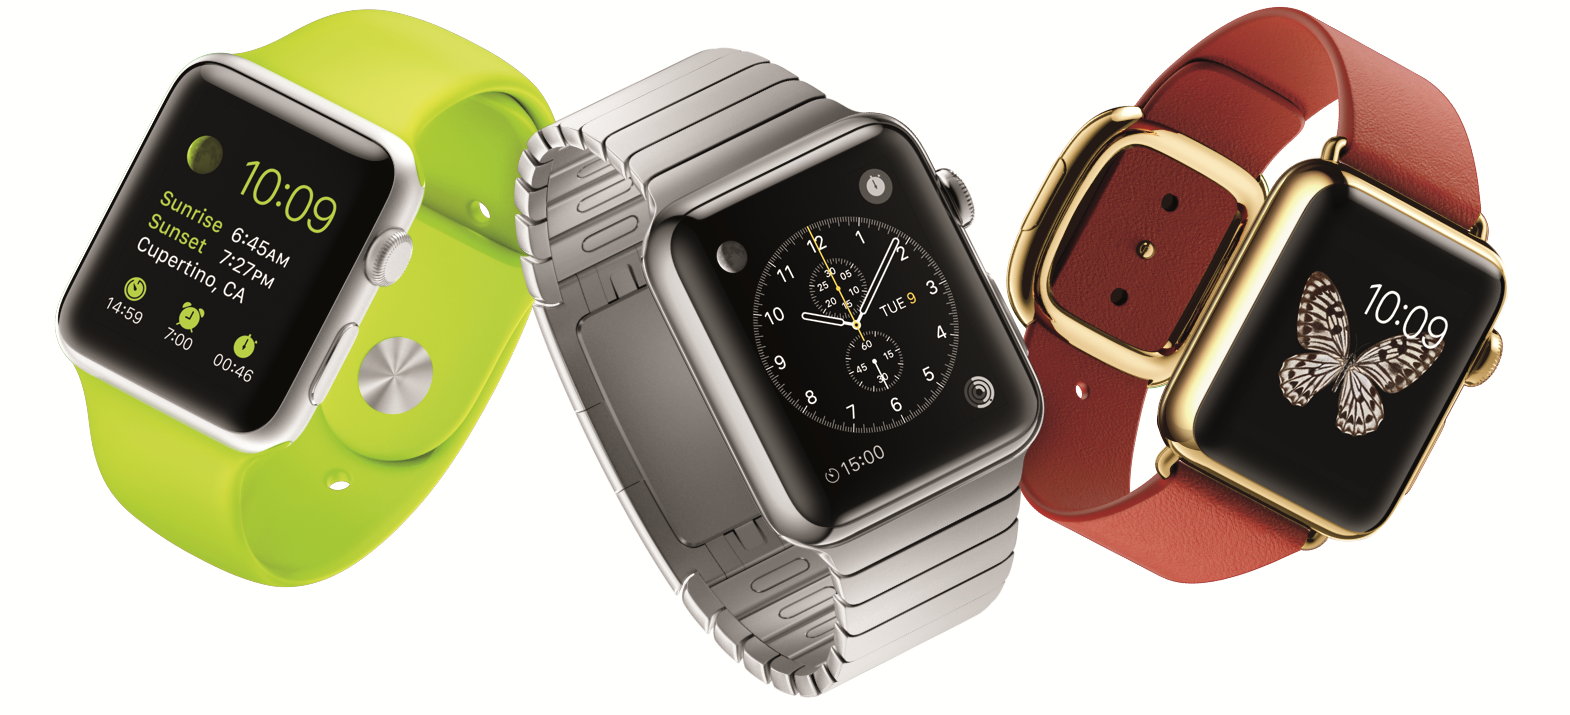 Smartwatch Shipments Are Up 60 Per Cent – or Down 52 Per Cent, Depending on Who You Ask